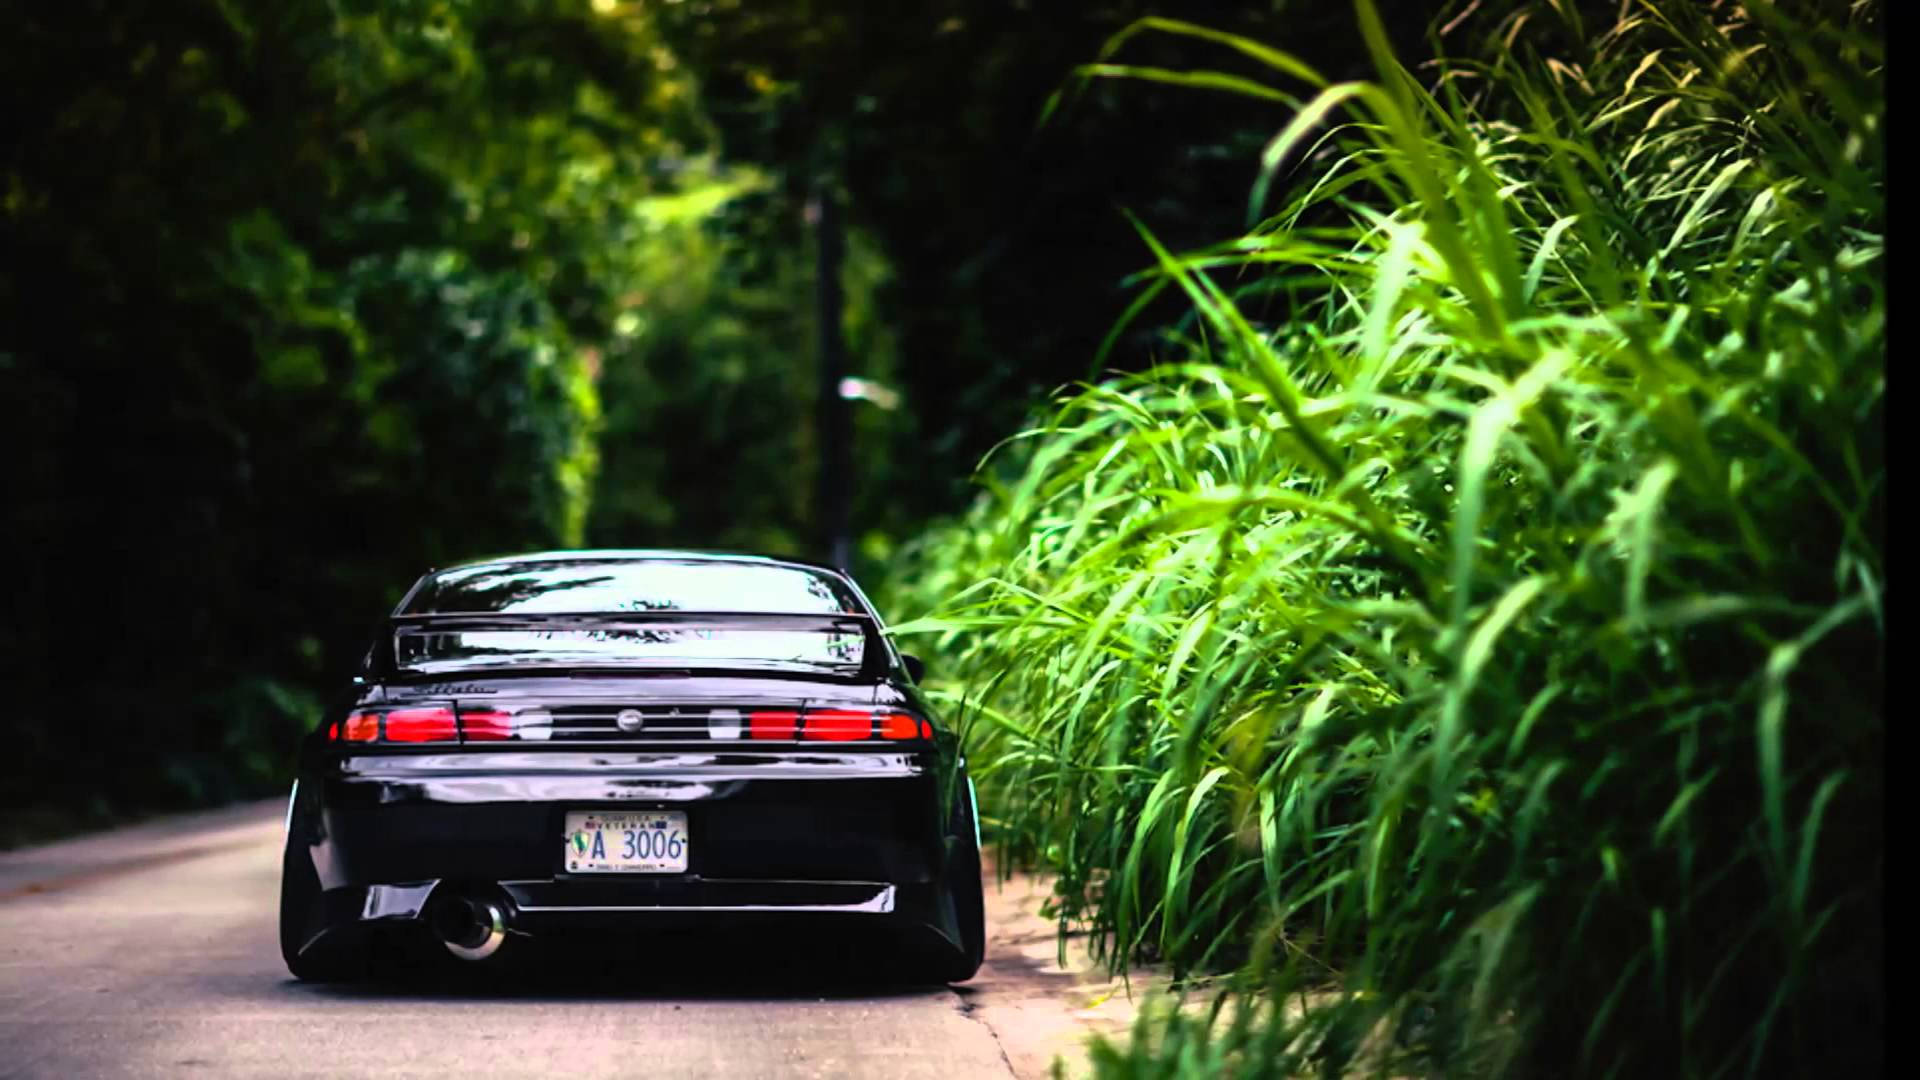 The Iconic Nissan Silvia S14 Wallpaper